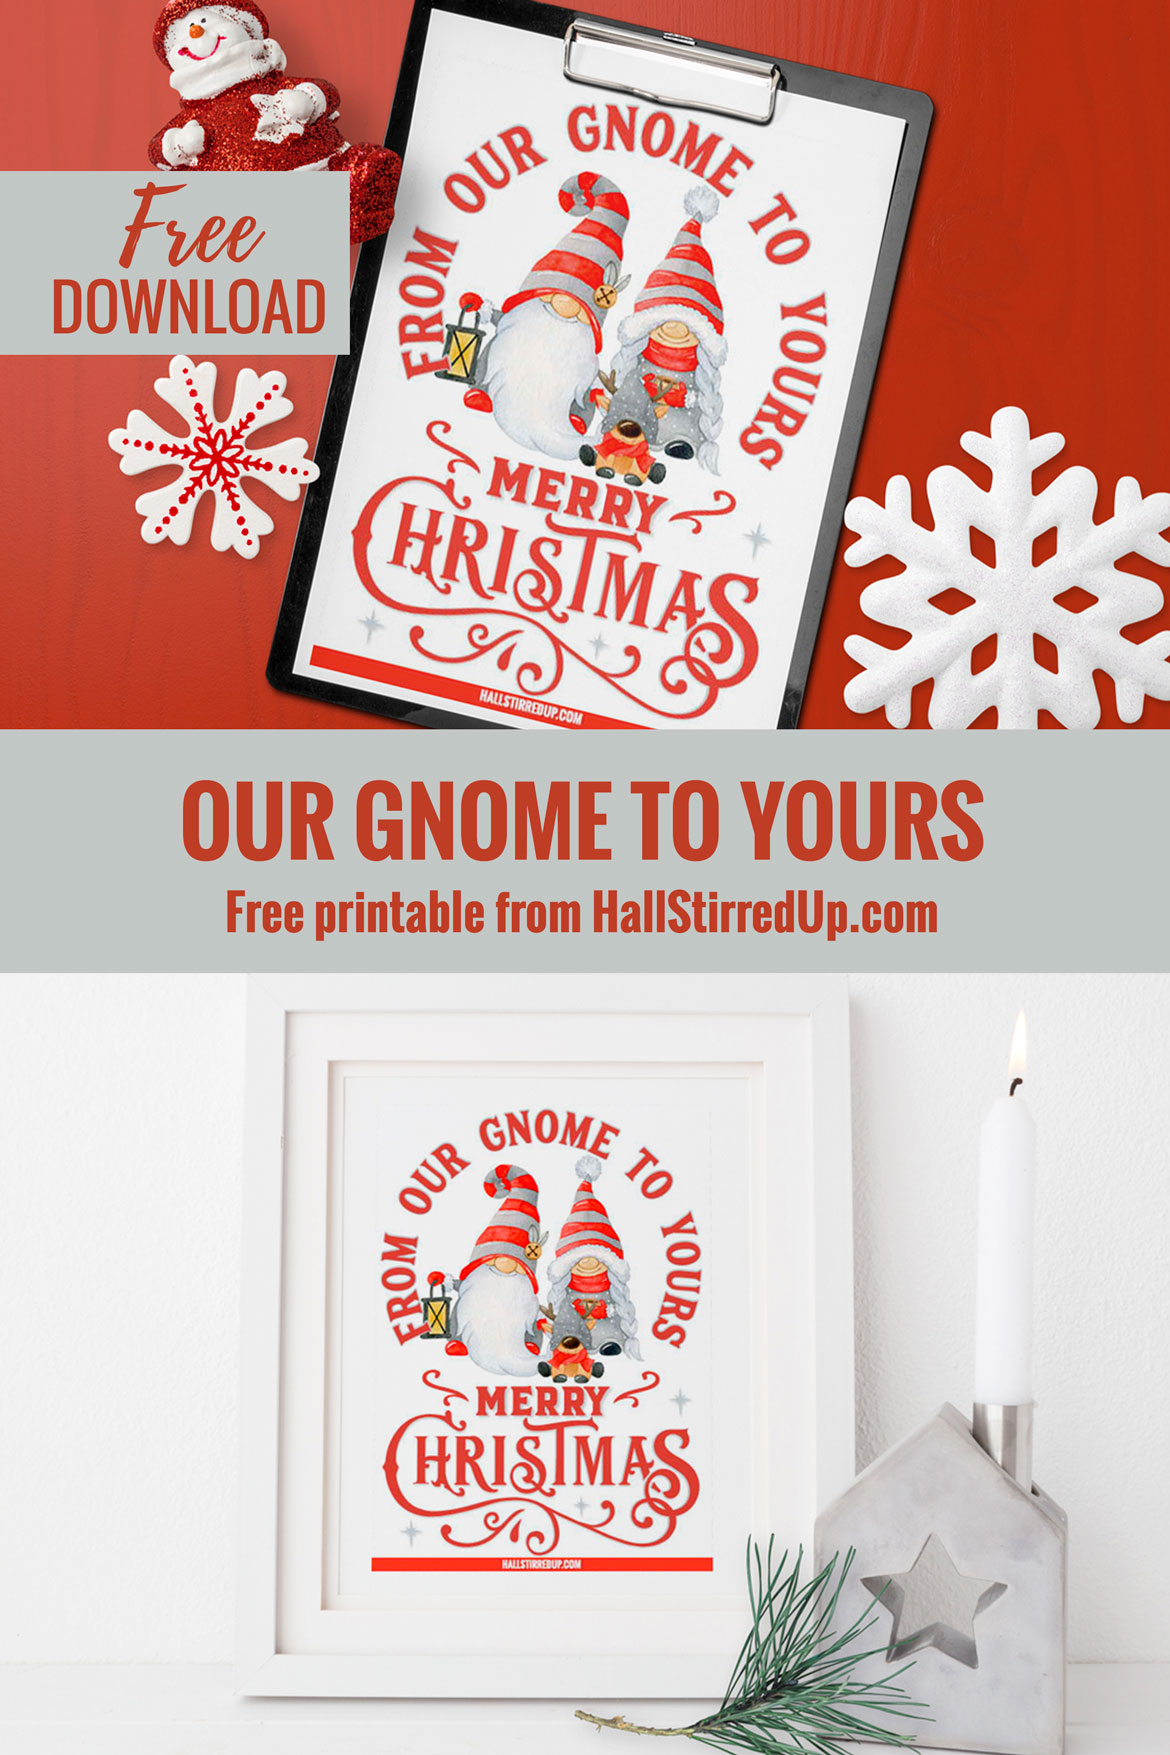 From our gnome to yours Share good tidings with a free Christmas printable